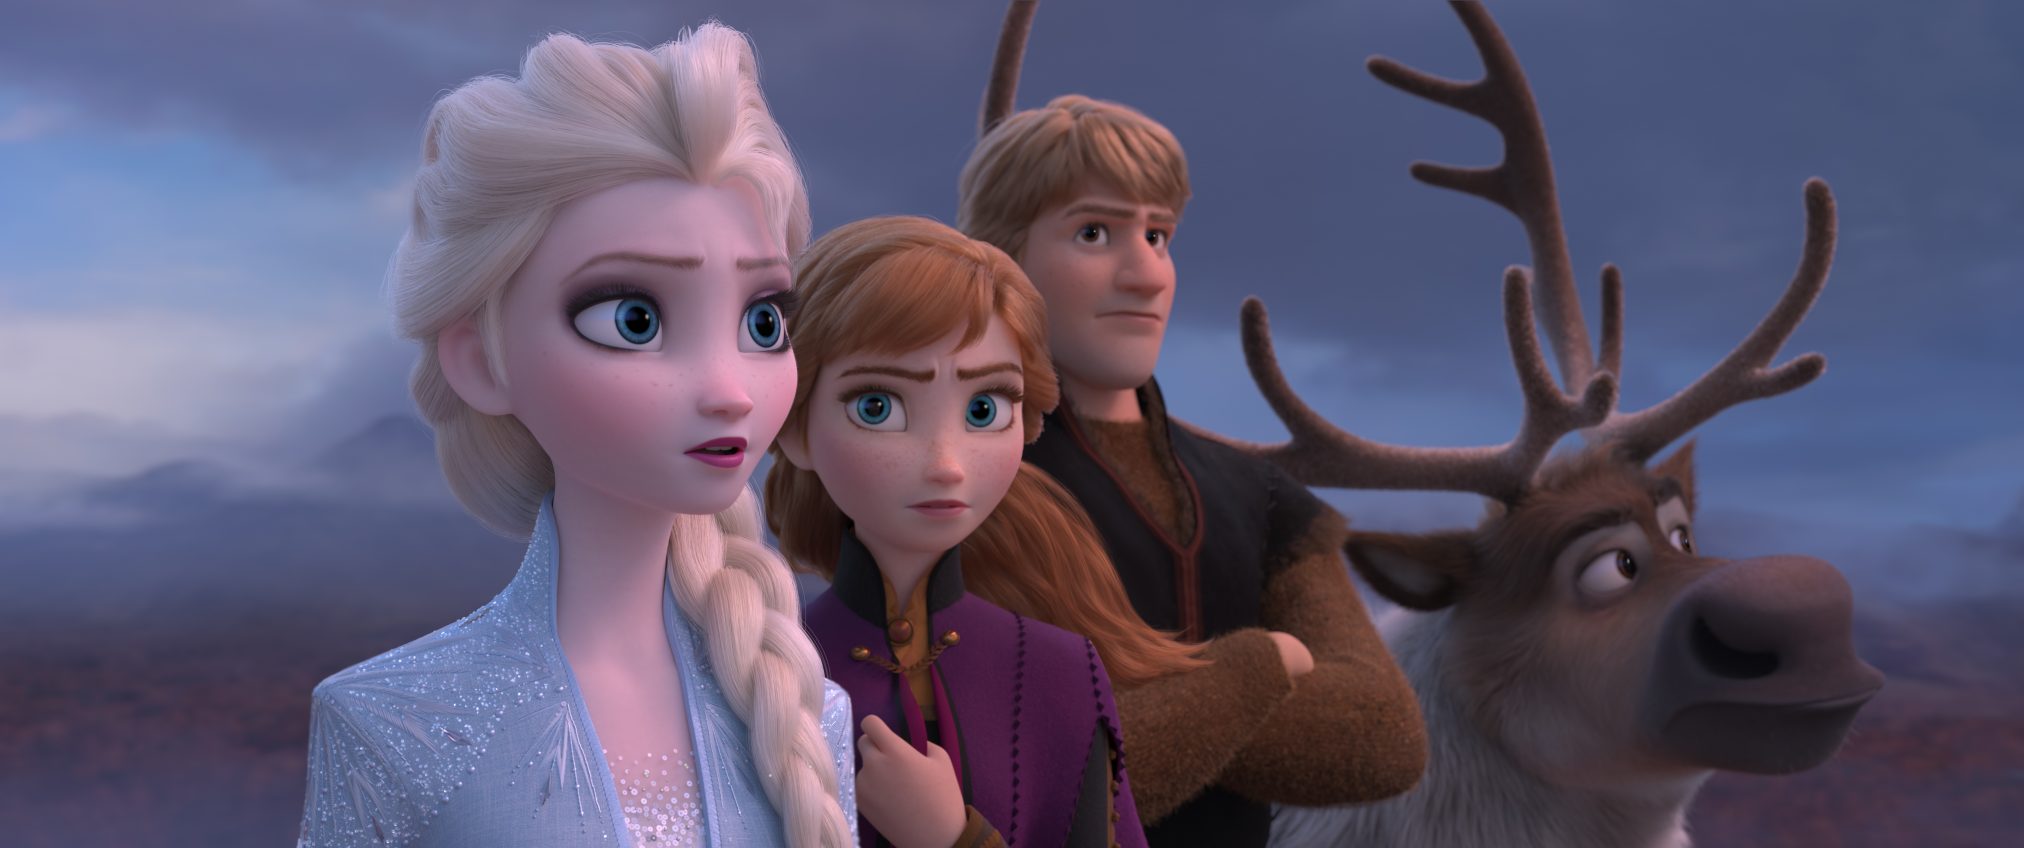 Don't Miss Disney's Frozen 2 New Trailer and Poster! In theaters Nov 22nd! #Frozen2